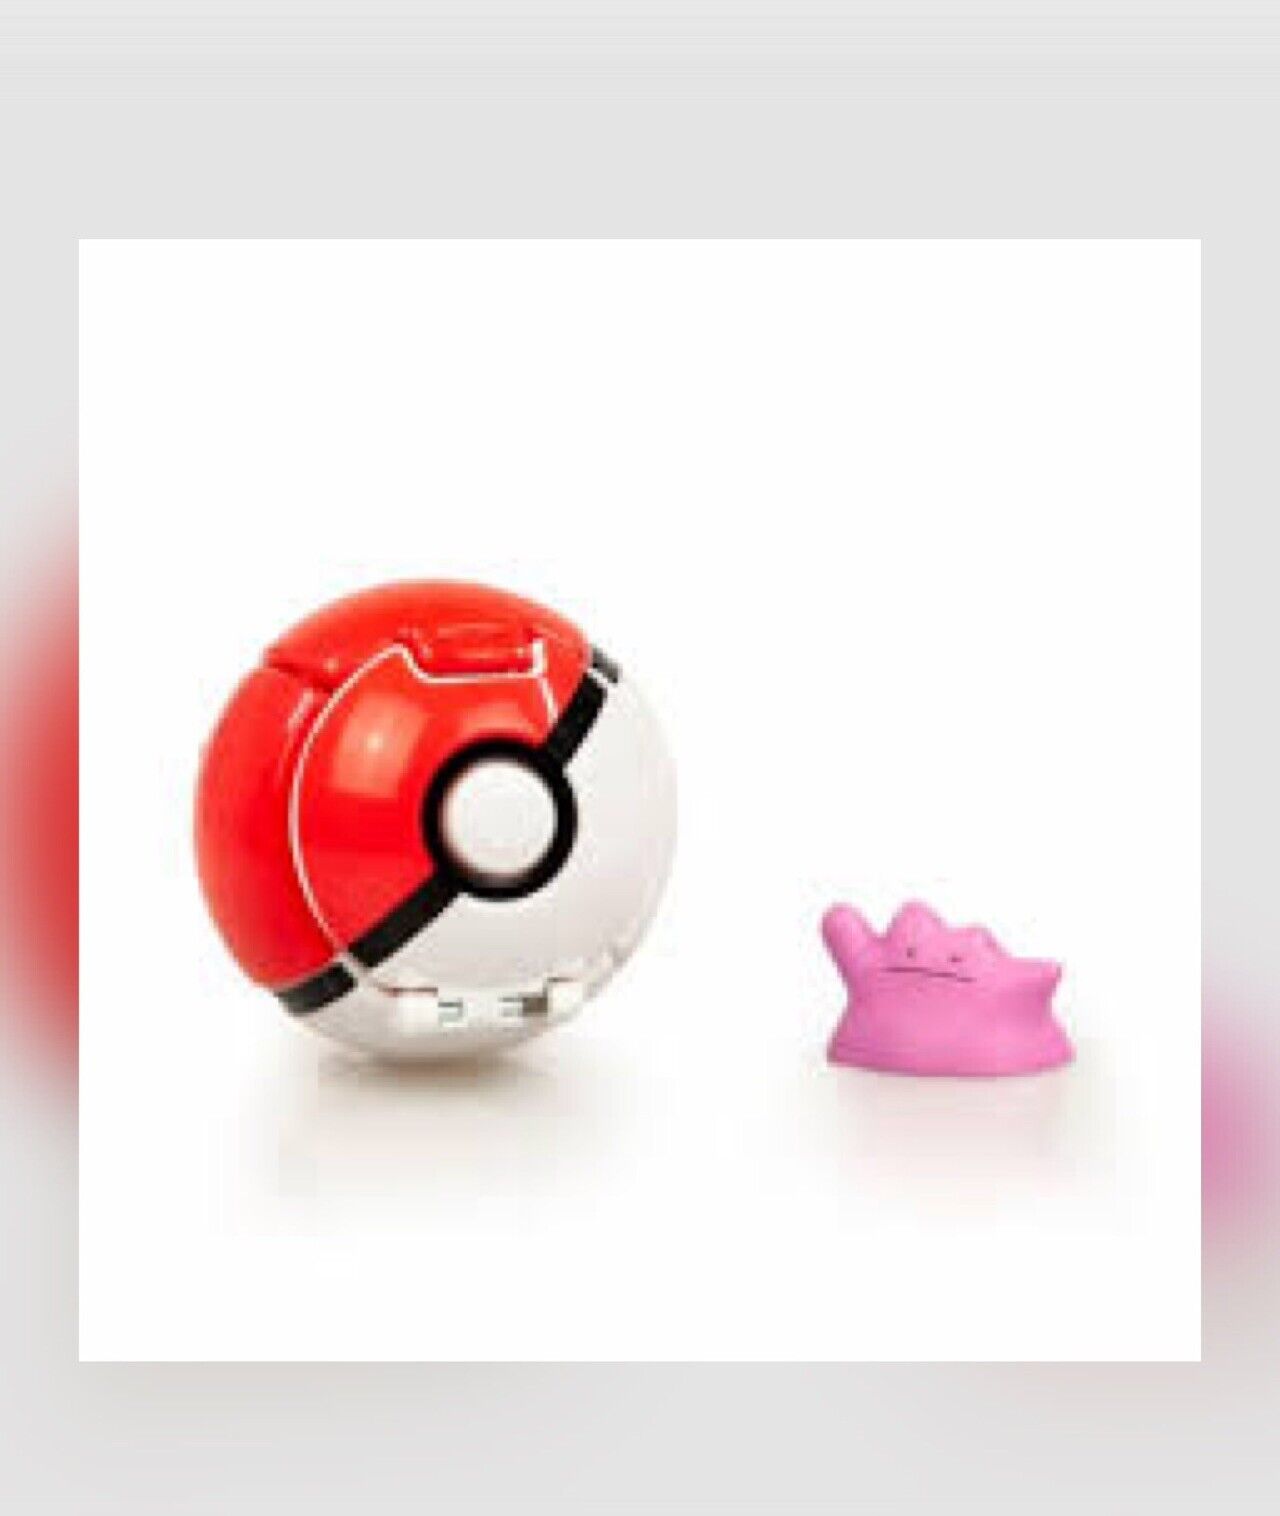 POKEMON Throw 'N' Pop Ditto Figure and Poke Ball NEW Sealed